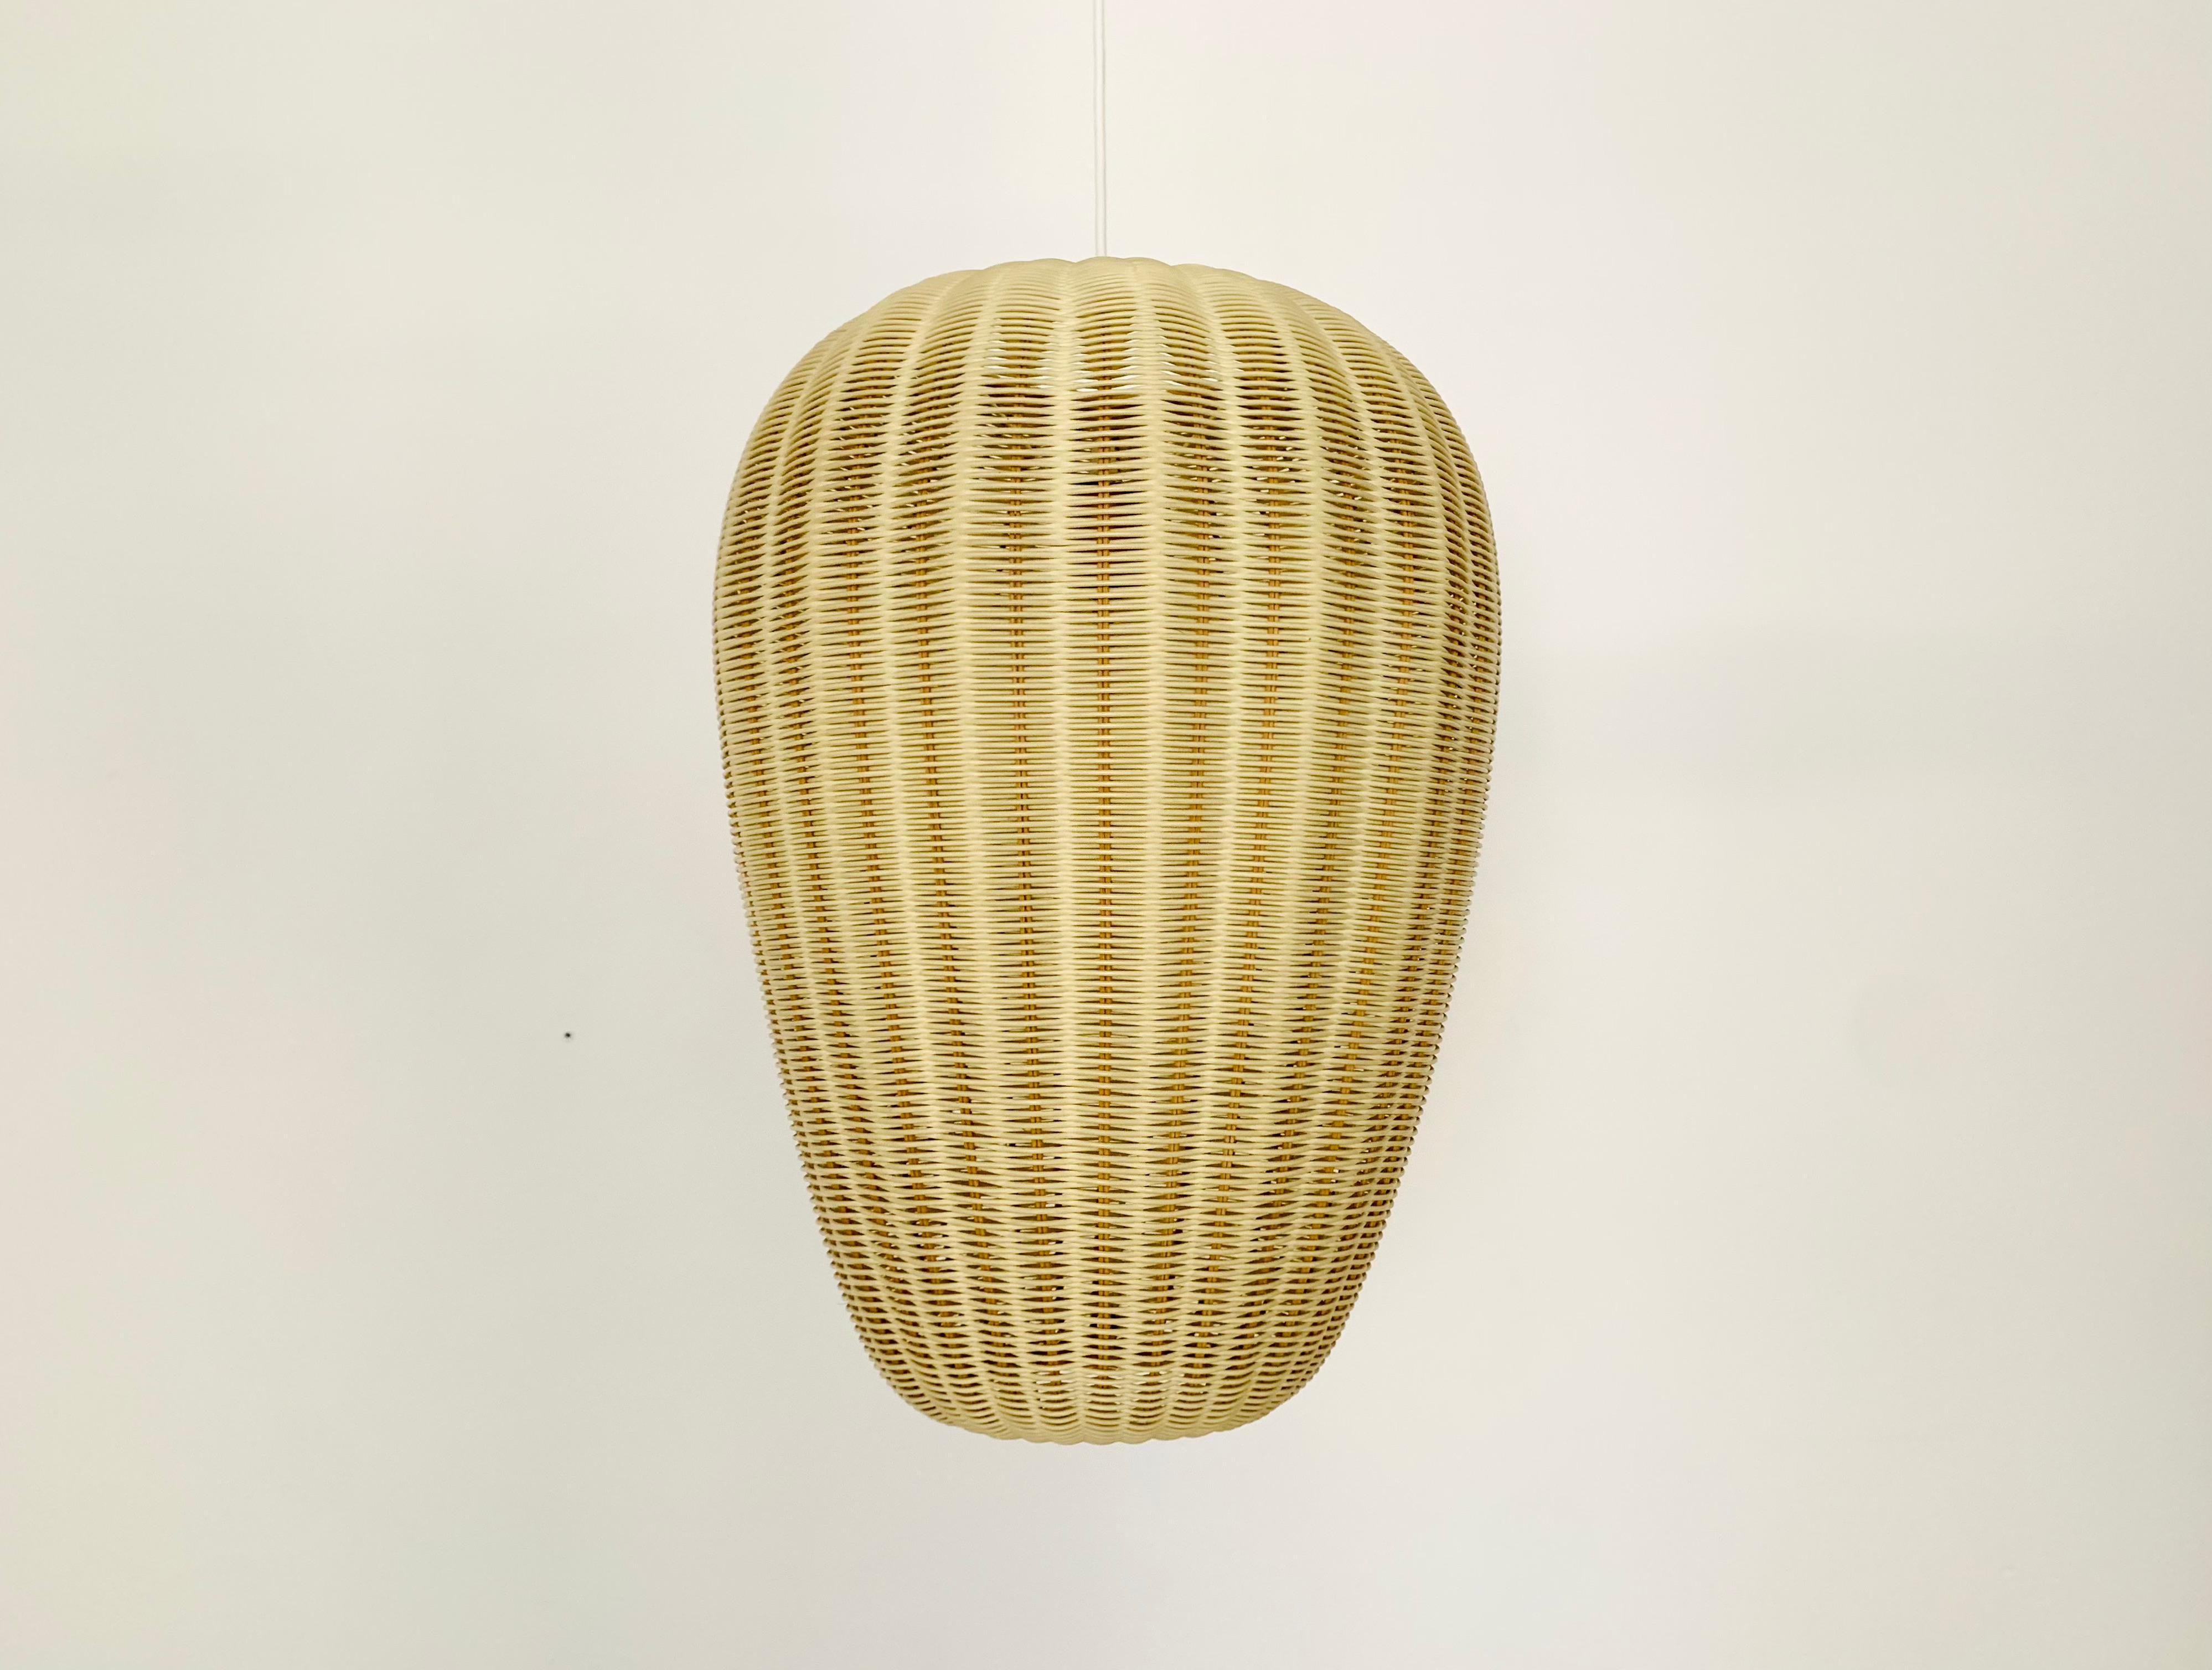 Beautiful and very large pendant lamp from the 1950s.
Great and unusual design with a fantastically comfortable look.
Very high quality workmanship.
A spectacular play of light is created.

Condition:

Very good vintage condition with slight signs